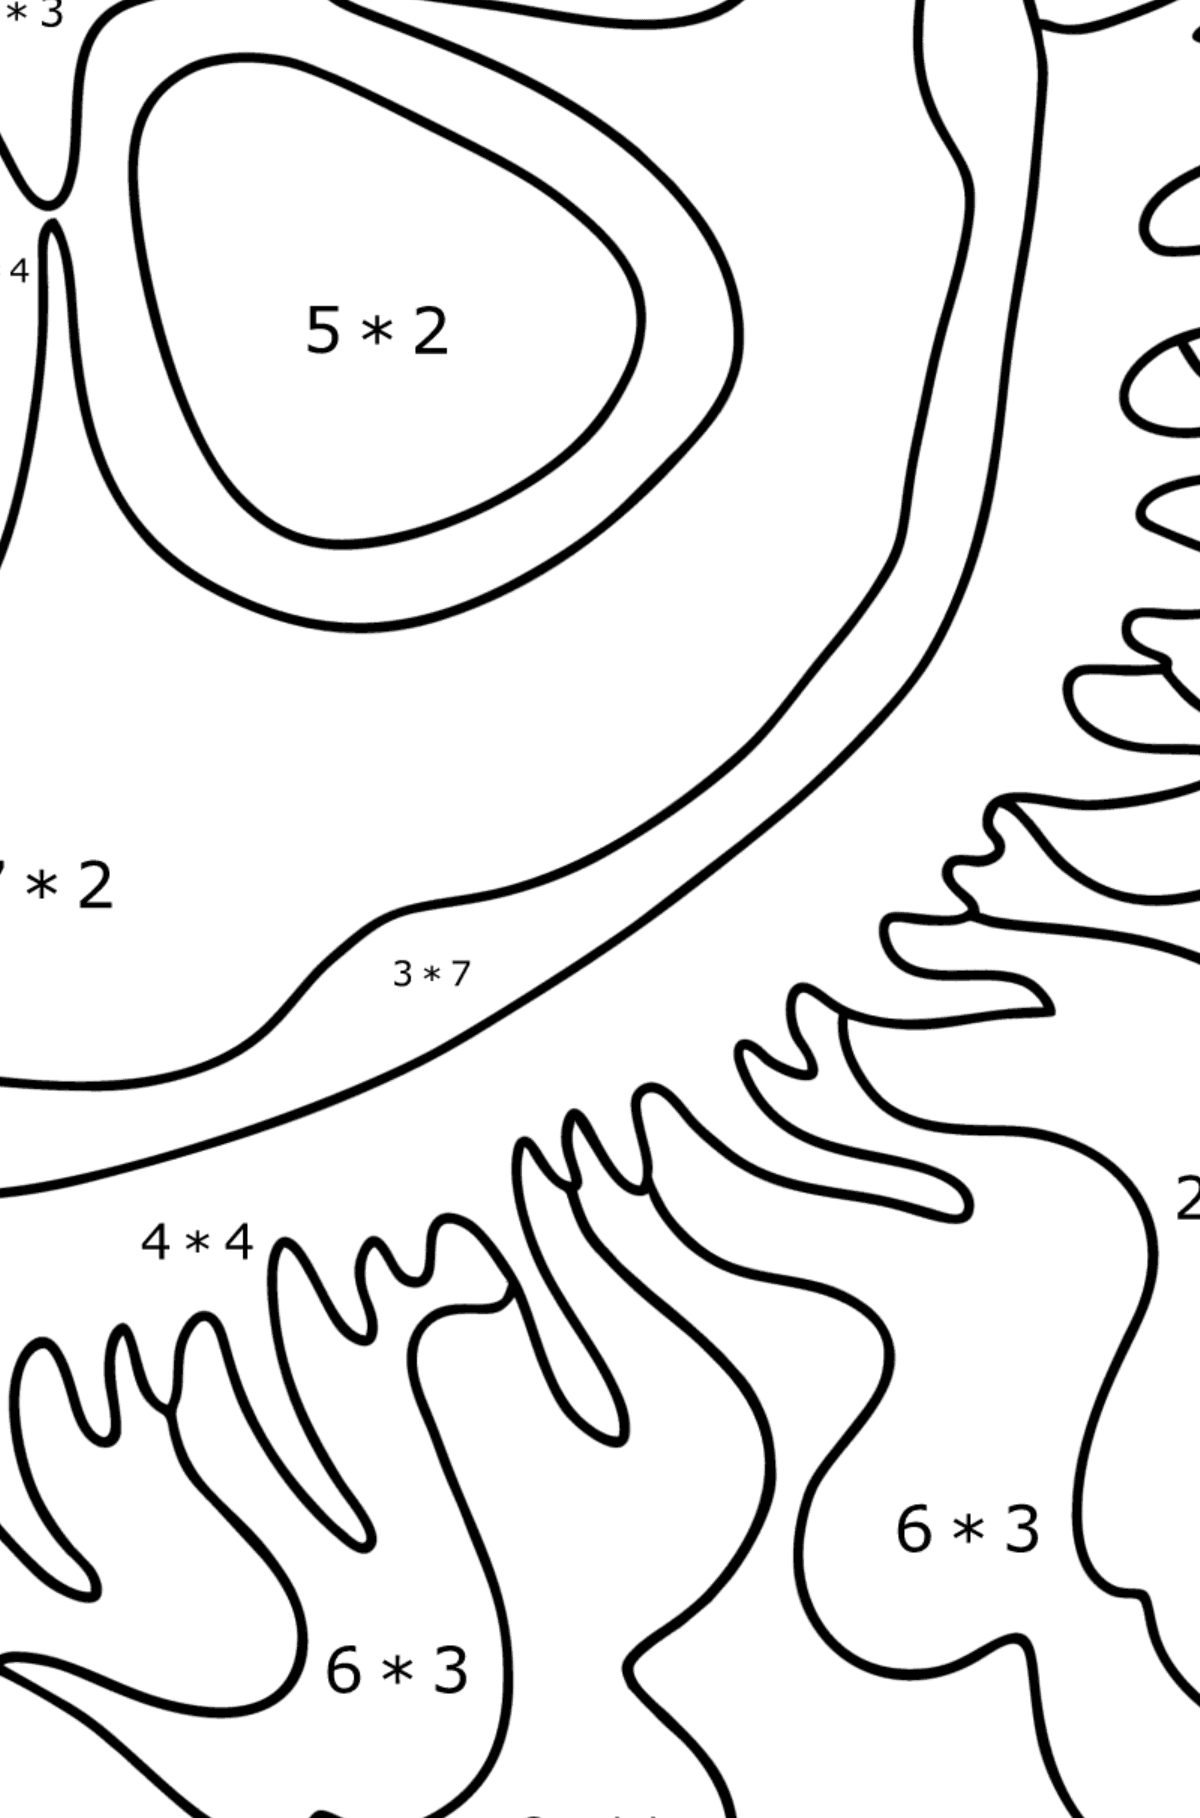 Moon jellyfish coloring page - Math Coloring - Multiplication for Kids